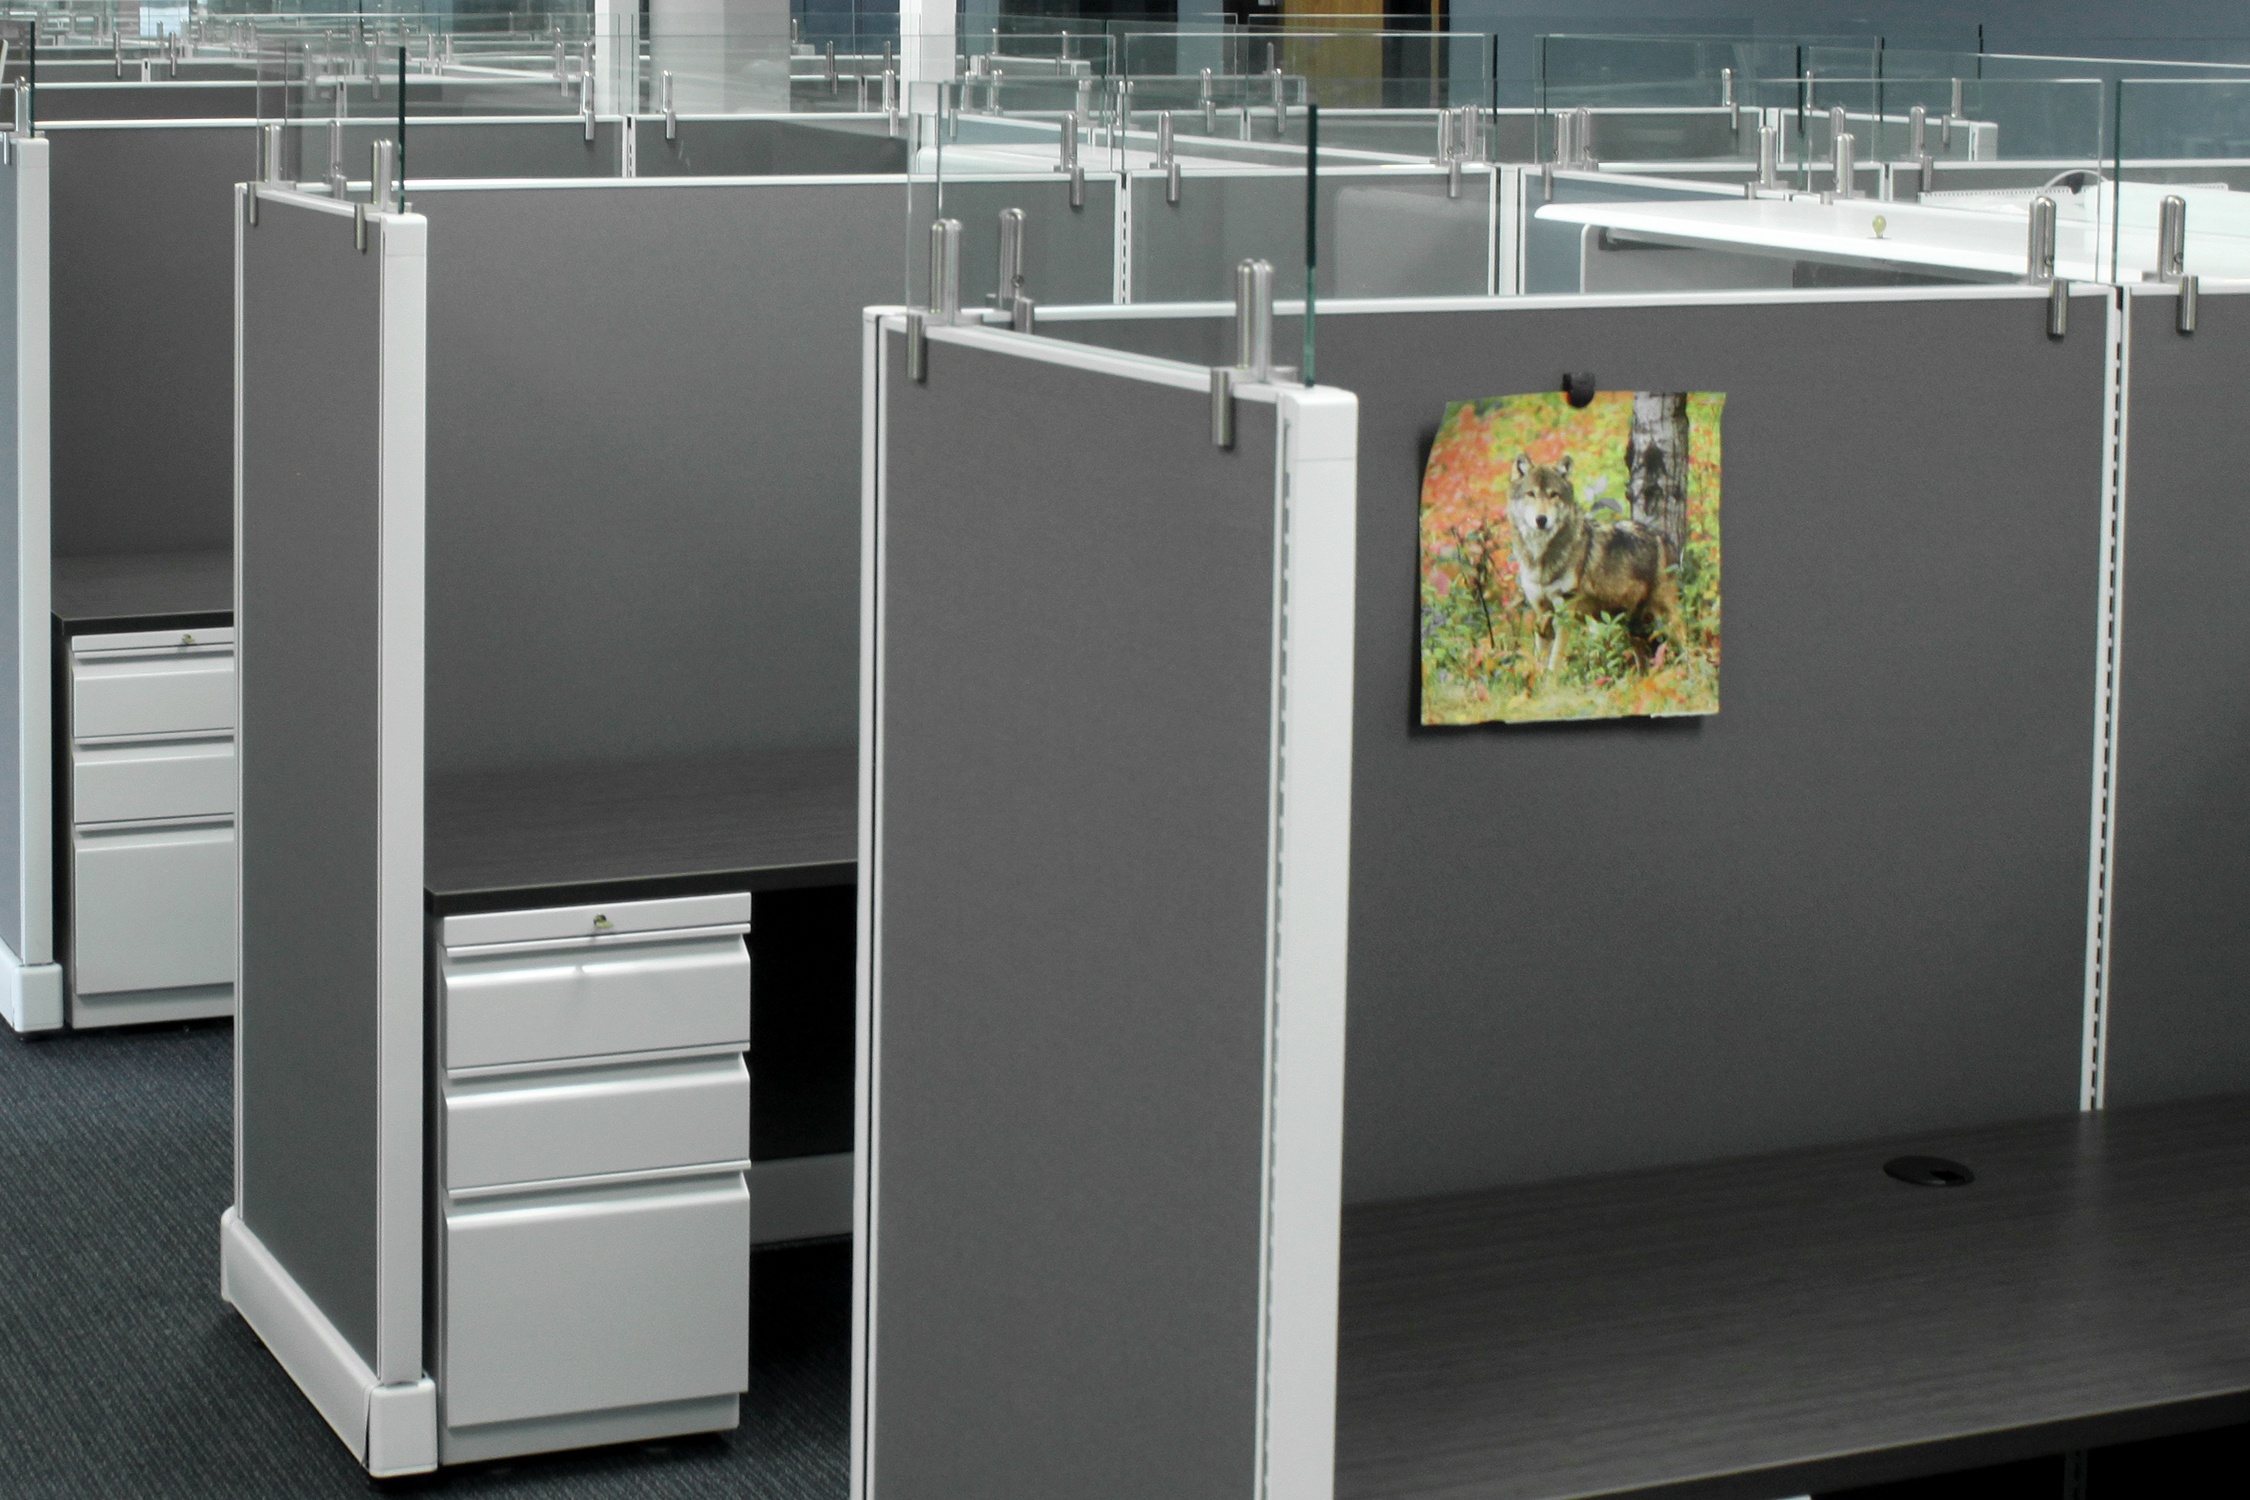 Glass panels allow for better light flow in the office space.